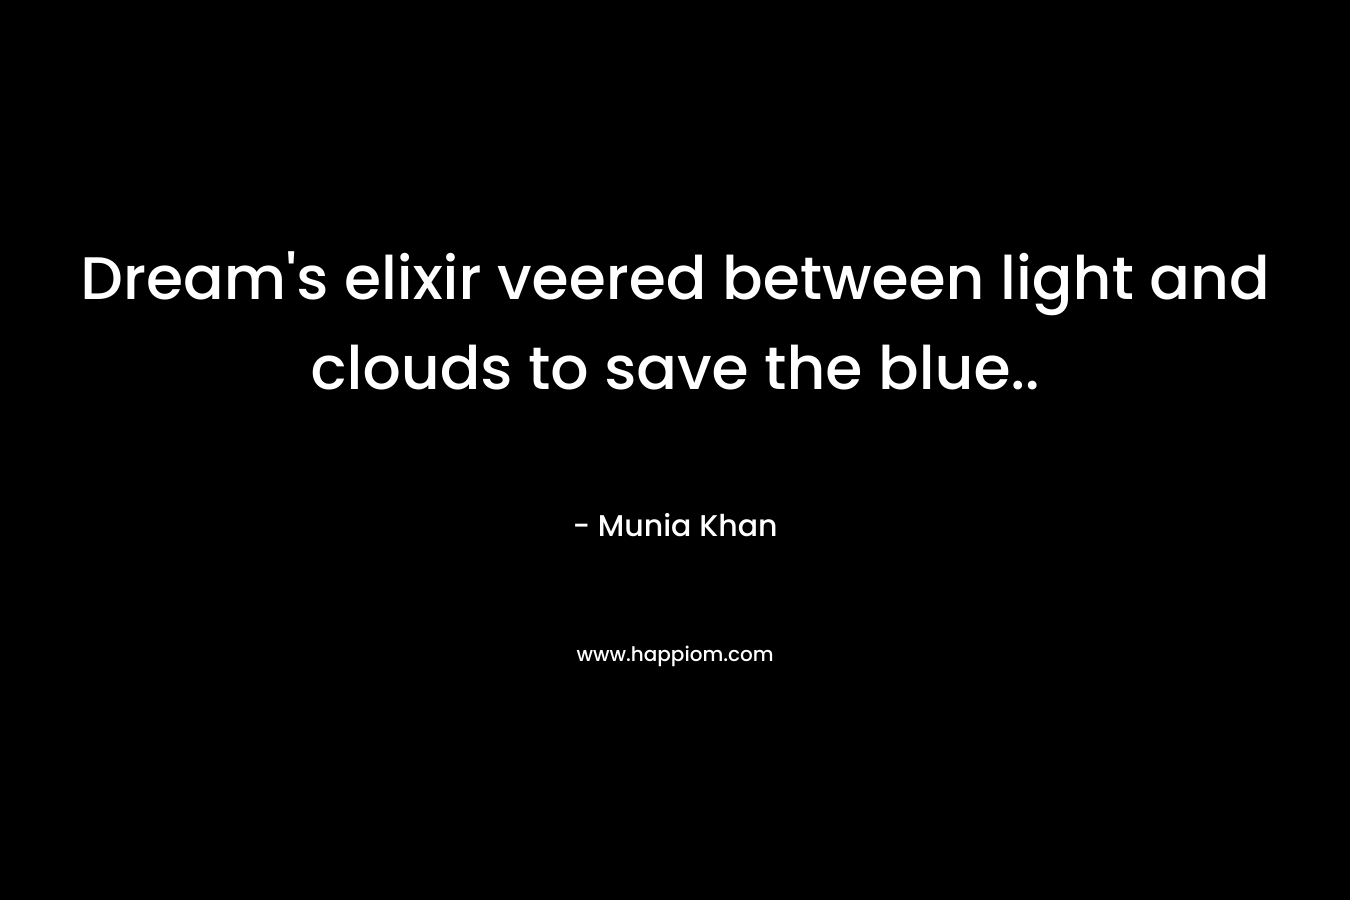 Dream's elixir veered between light and clouds to save the blue..